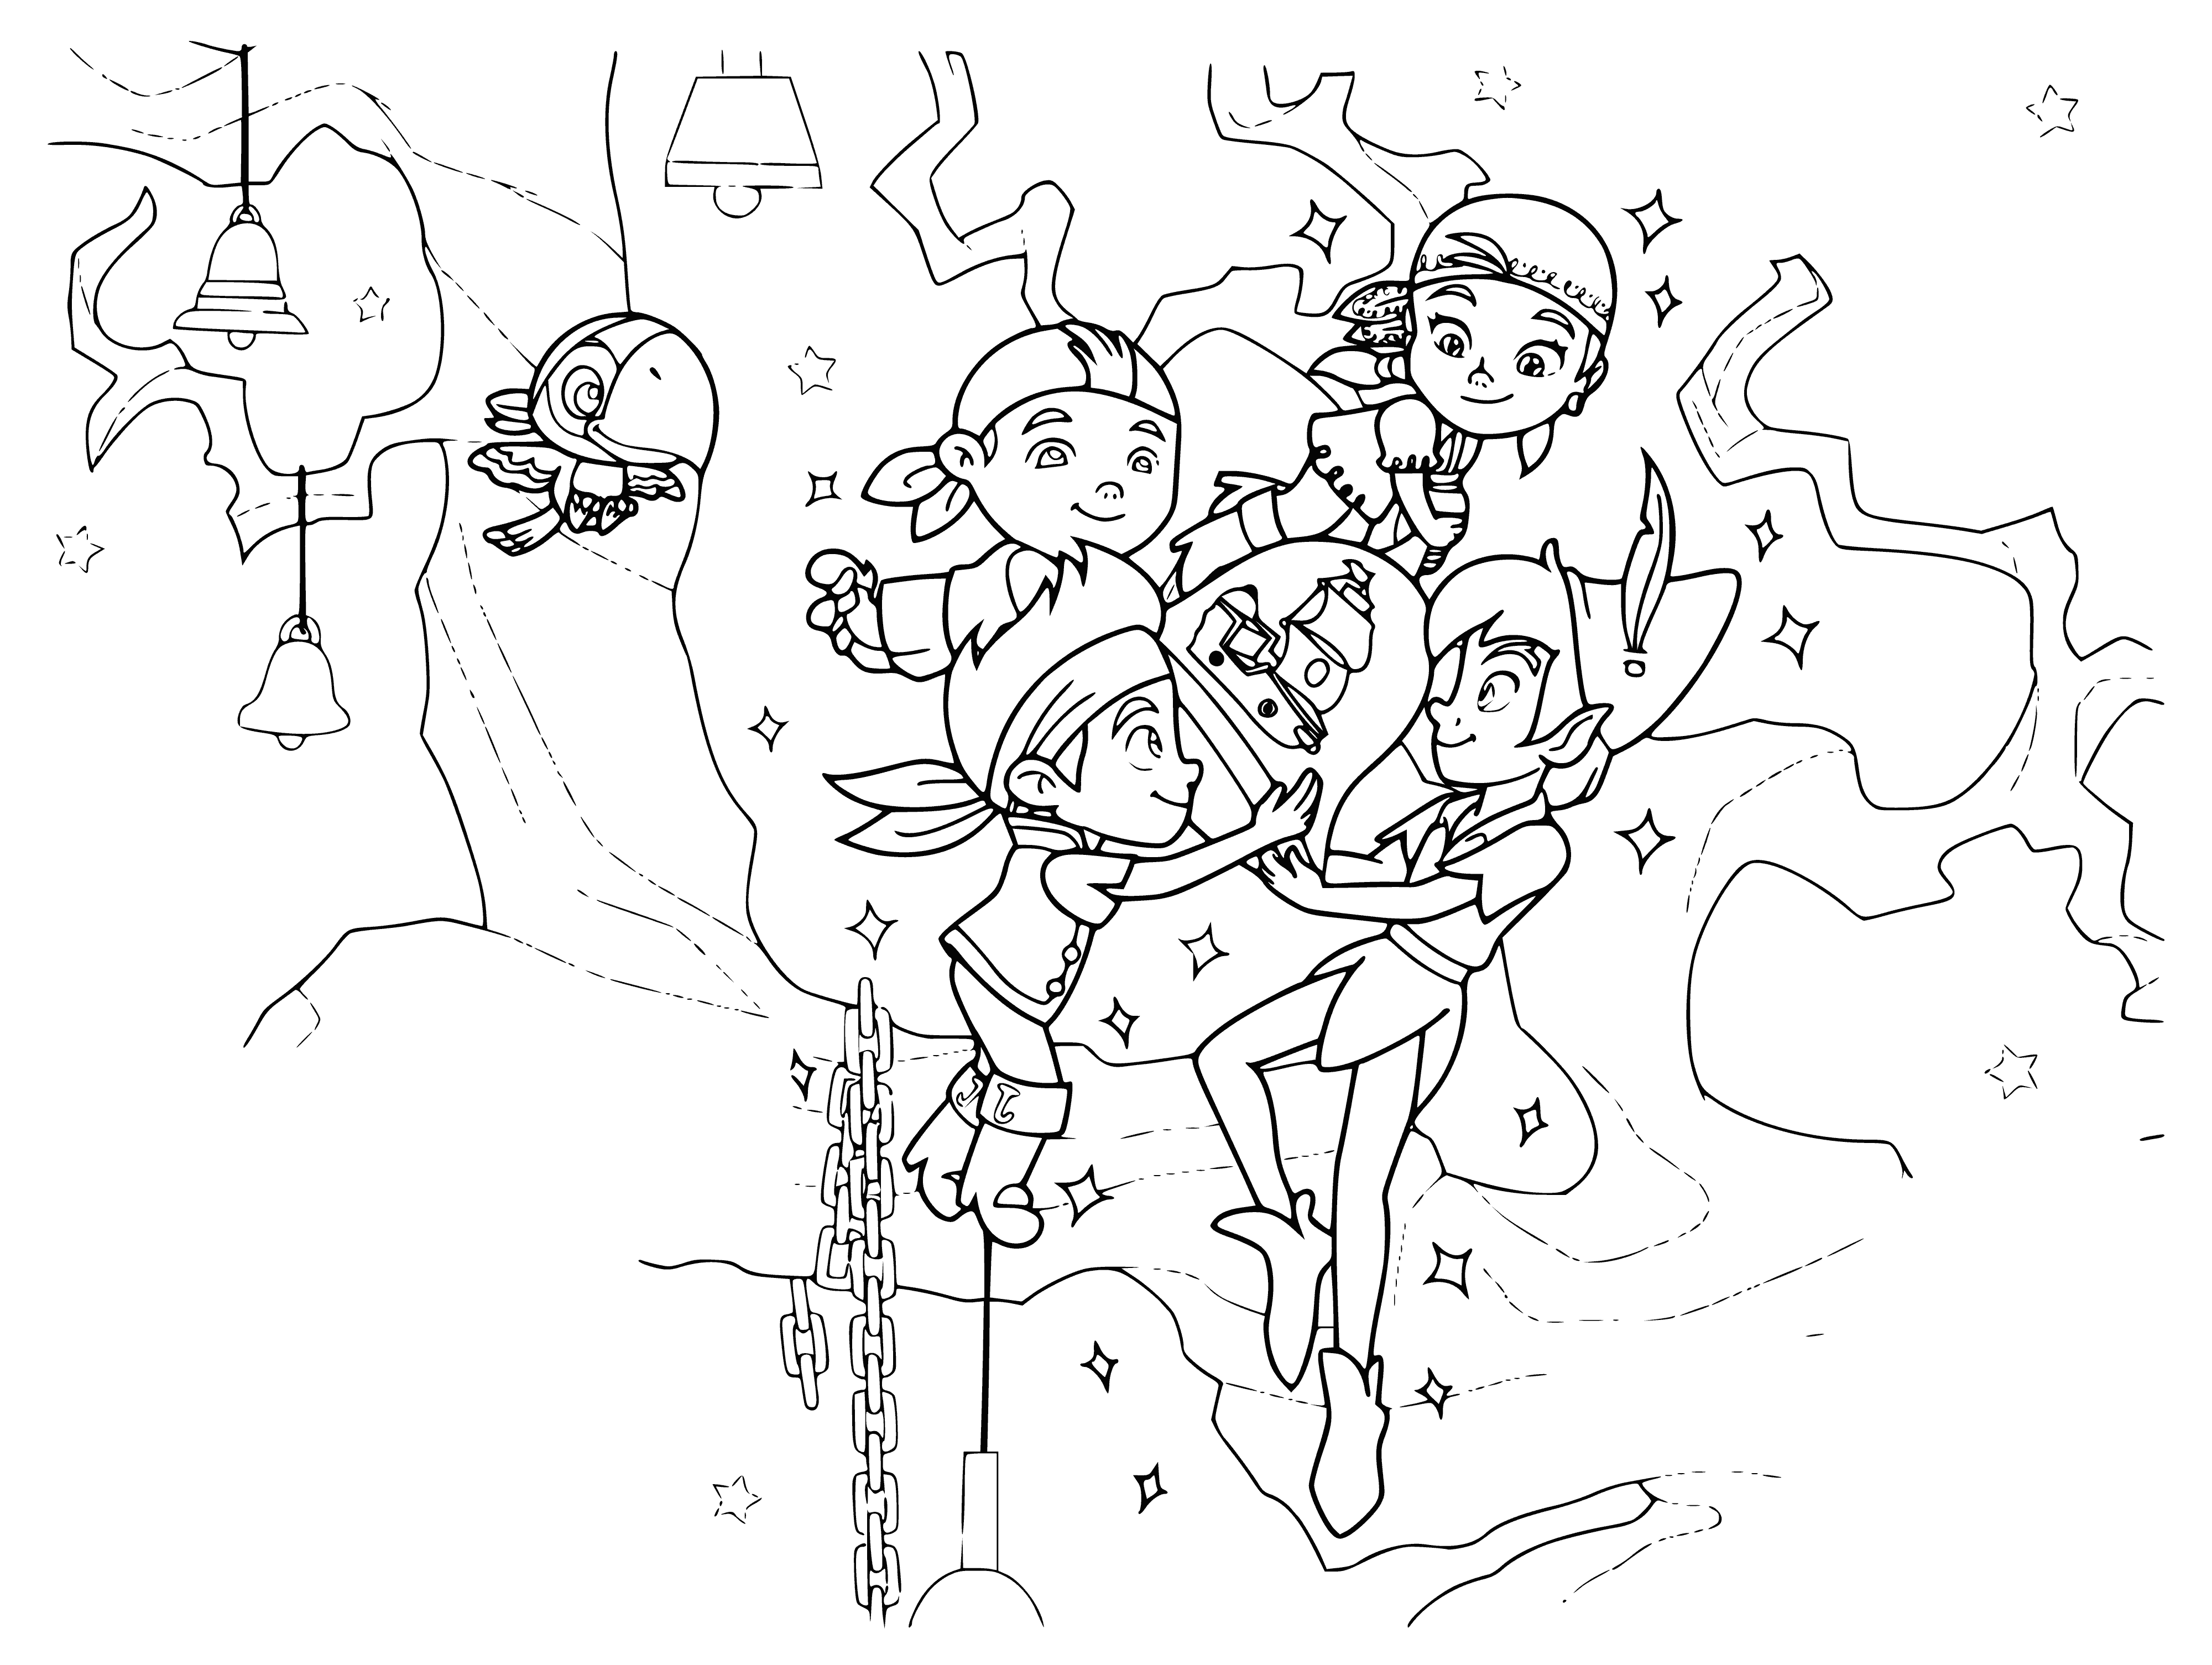 coloring page: Jake & friends gather round a golden bell on the ship; Izzy holds hammer to ring it & Skully perches on top. Cubby & Jake look up.